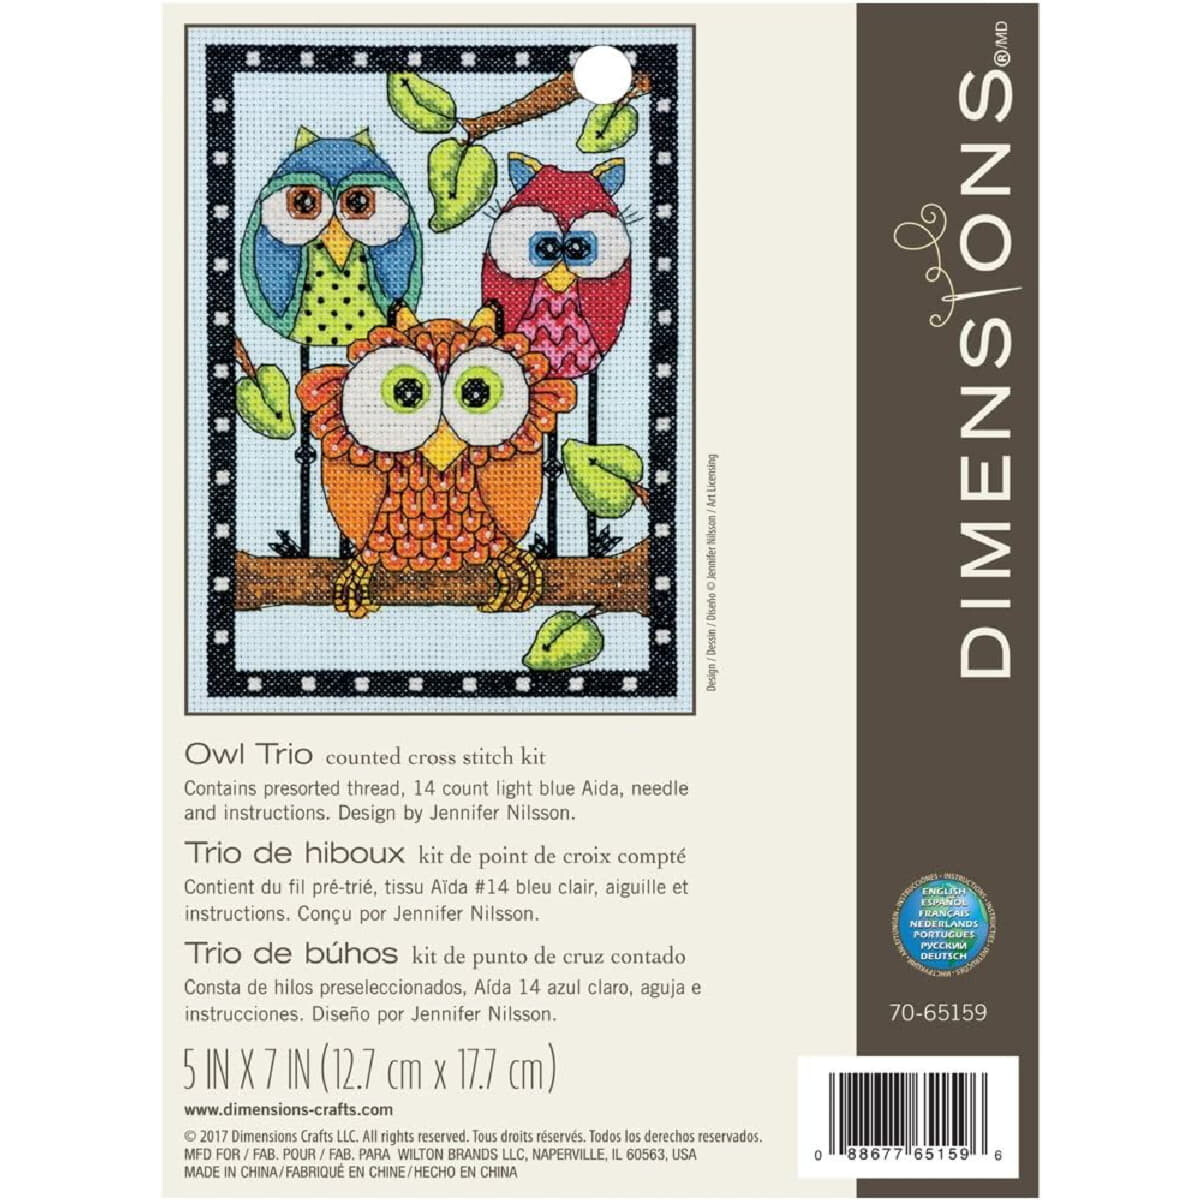 Dimensions counted cross stitch kit "Owl Trio",...